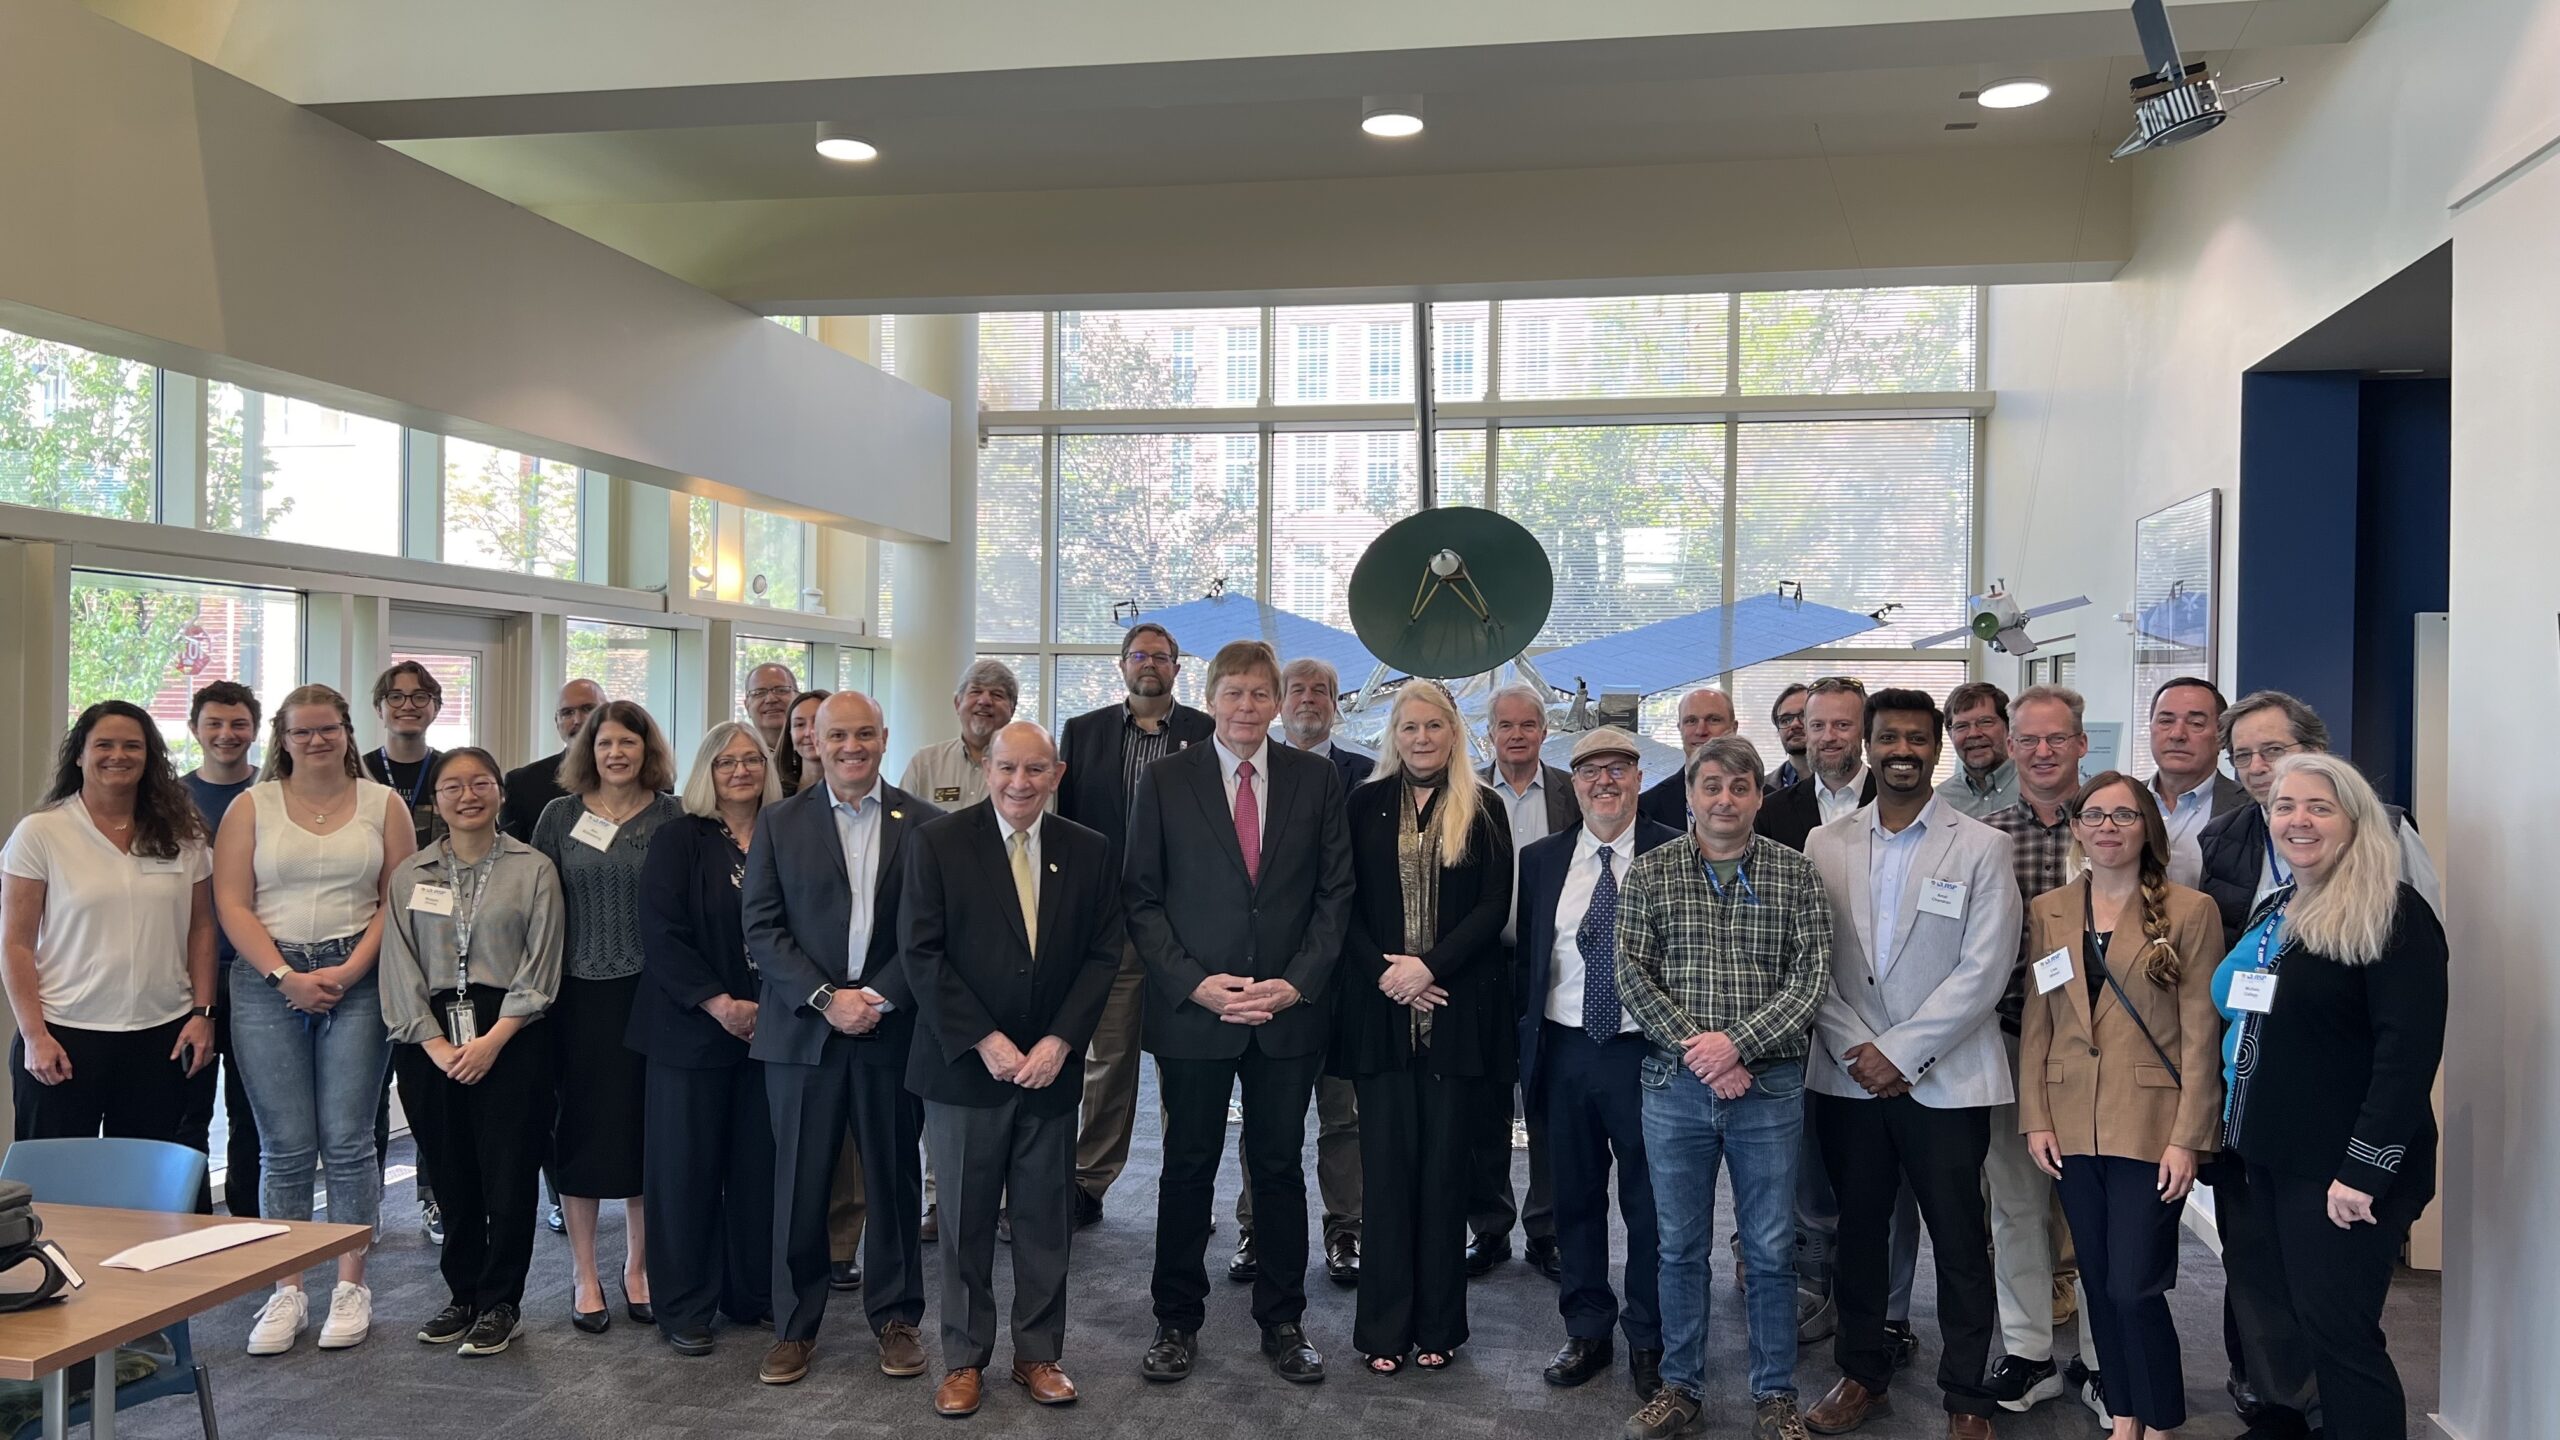 In May, leadership of the Committee on Space Research (COSPAR) attended a ceremony at the Laboratory for Atmospheric and Space Physics at the University of Colorado Boulder to designate the LASP CubeSat group as a COSPAR Center of Excellence for Capacity Building in CubeSat Technologies. Credit: LASP